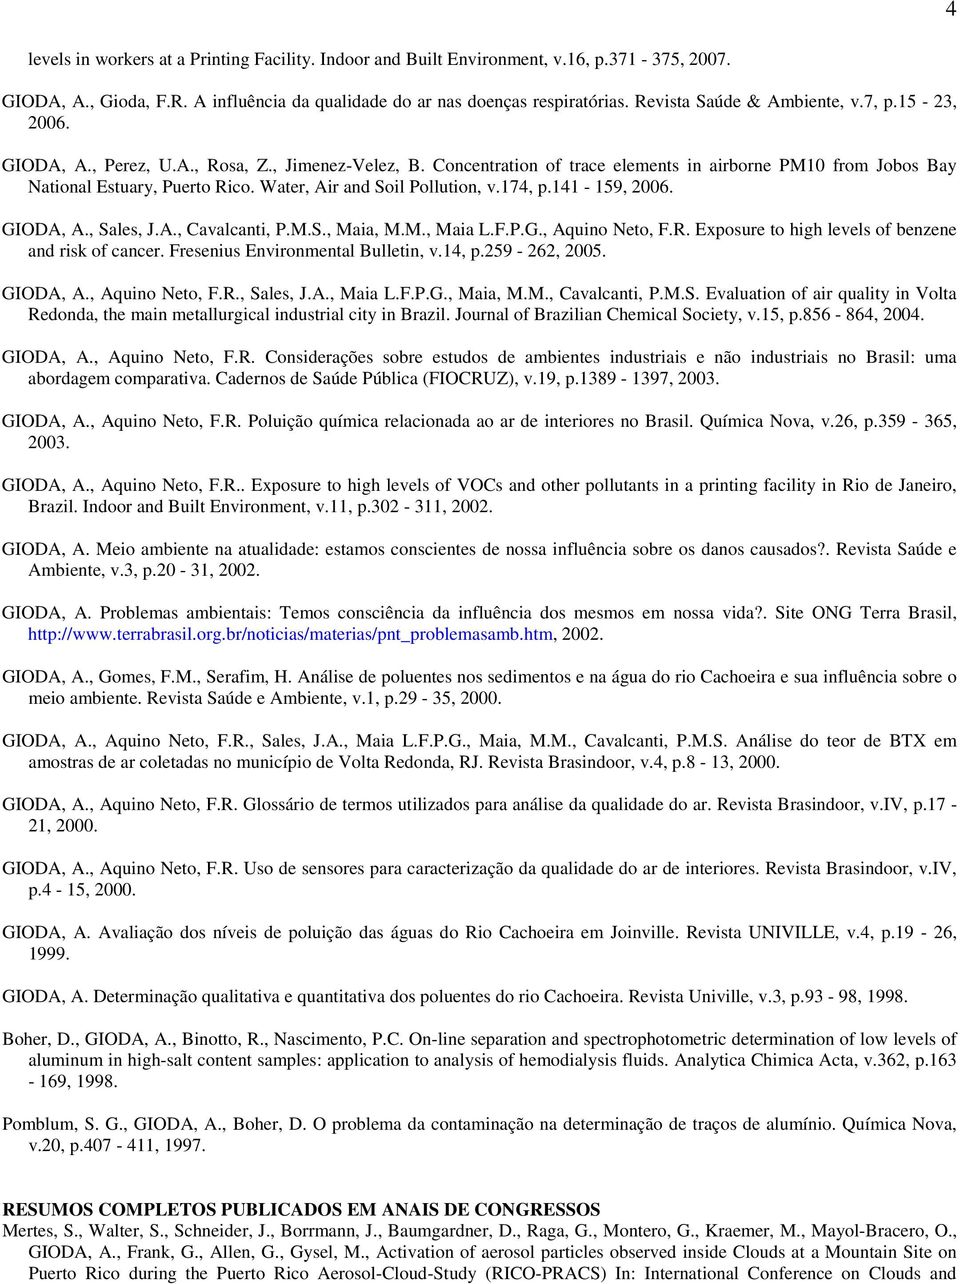 Water, Air and Soil Pollution, v.174, p.141-159, 2006. GIODA, A., Sales, J.A., Cavalcanti, P.M.S., Maia, M.M., Maia L.F.P.G., Aquino Neto, F.R. Exposure to high levels of benzene and risk of cancer.